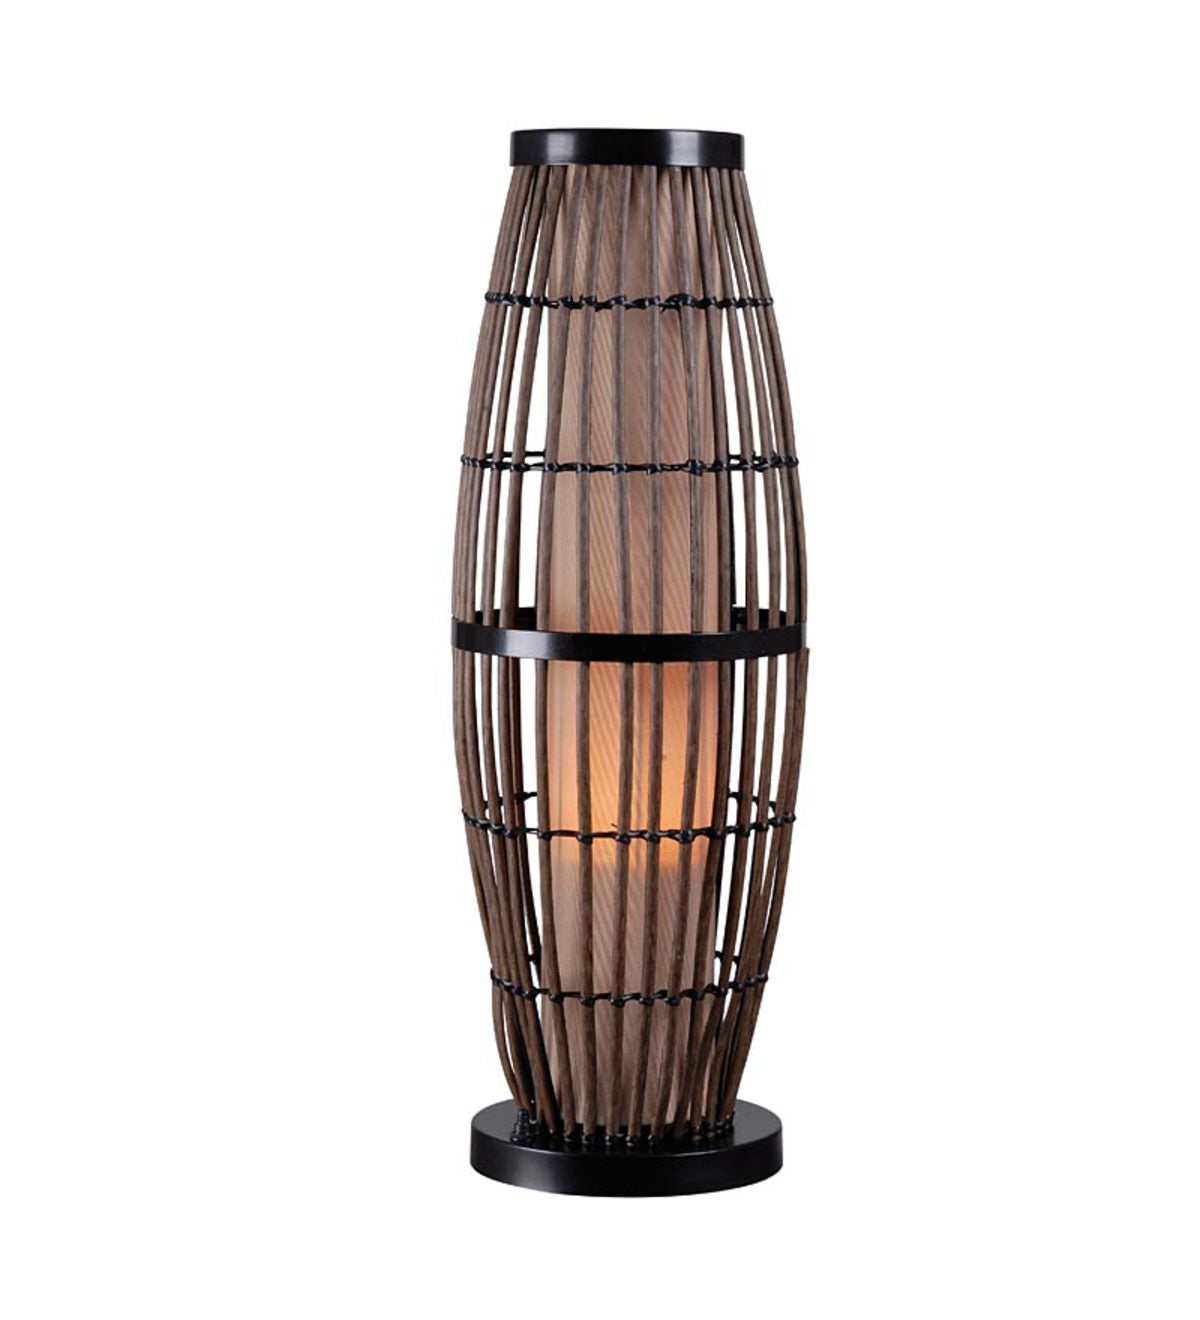 Biscayne Outdoor Table Lamp